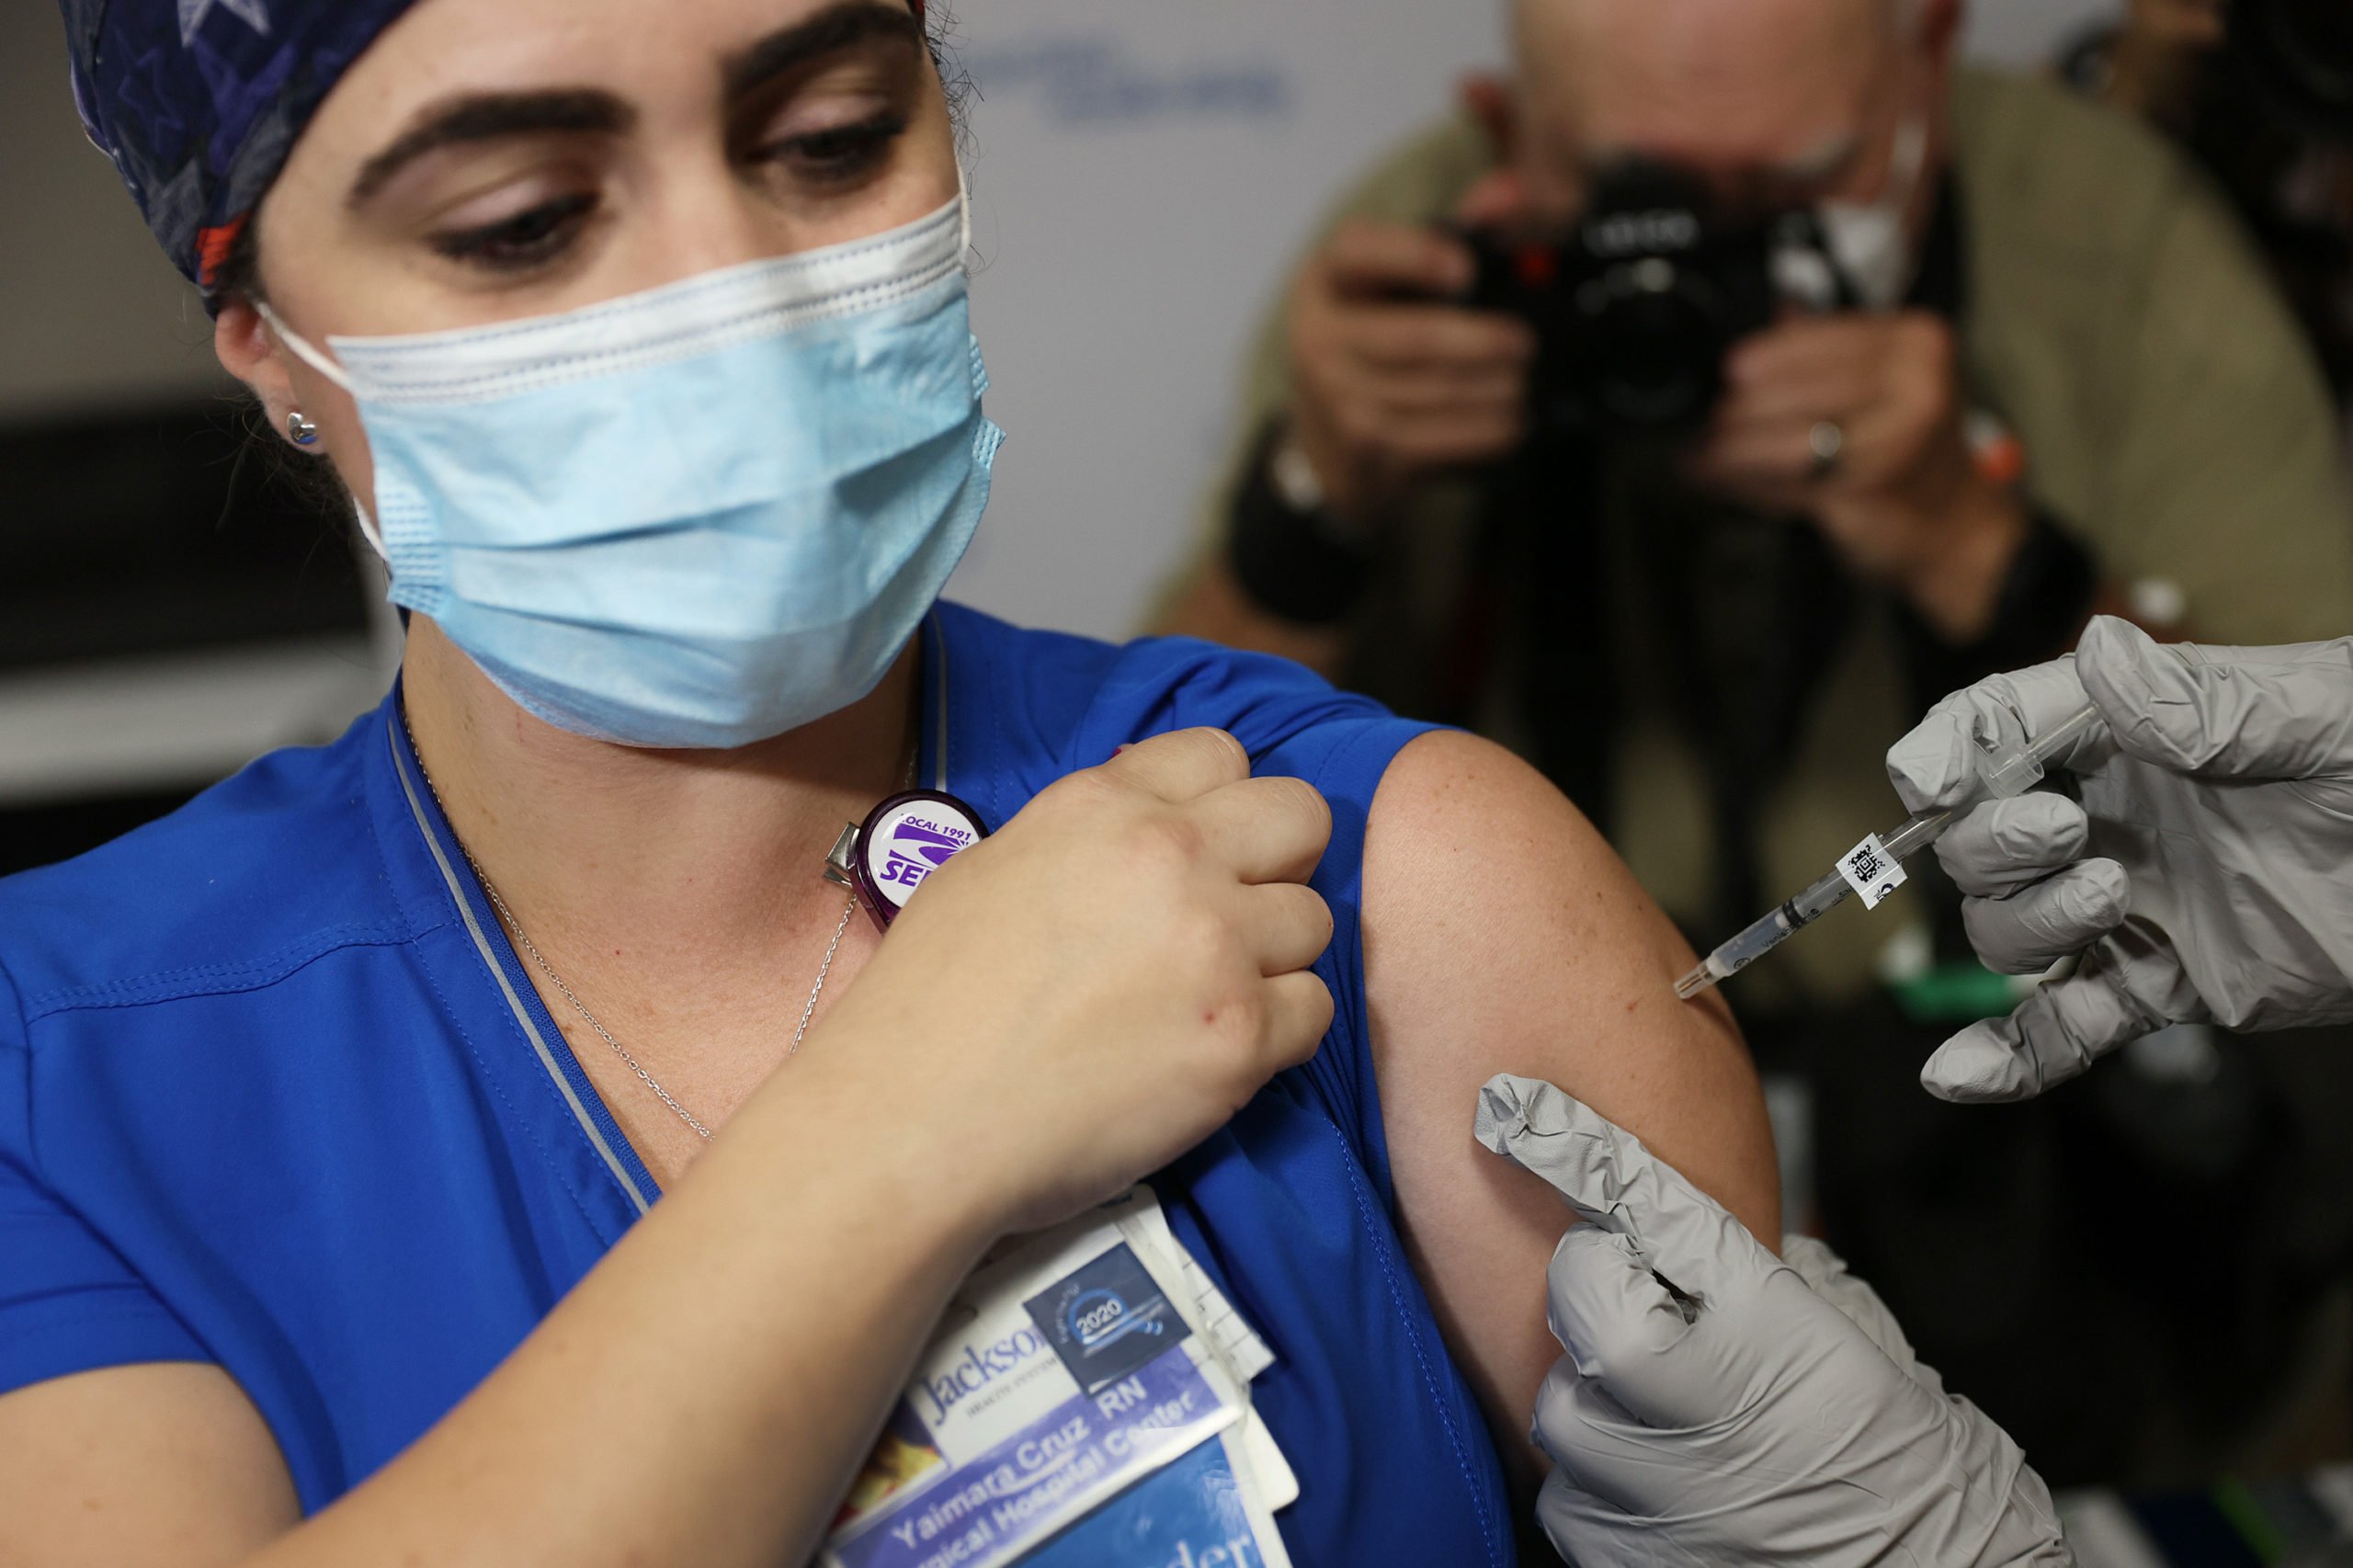 RN from Jackson Health Systems, receives a Pfizer-BioNtech COVID-19 vaccine at the Jackson Memorial Hospital on December 15, 2020 in Miami, Florida. (Photo by Joe Raedle/Getty Images)